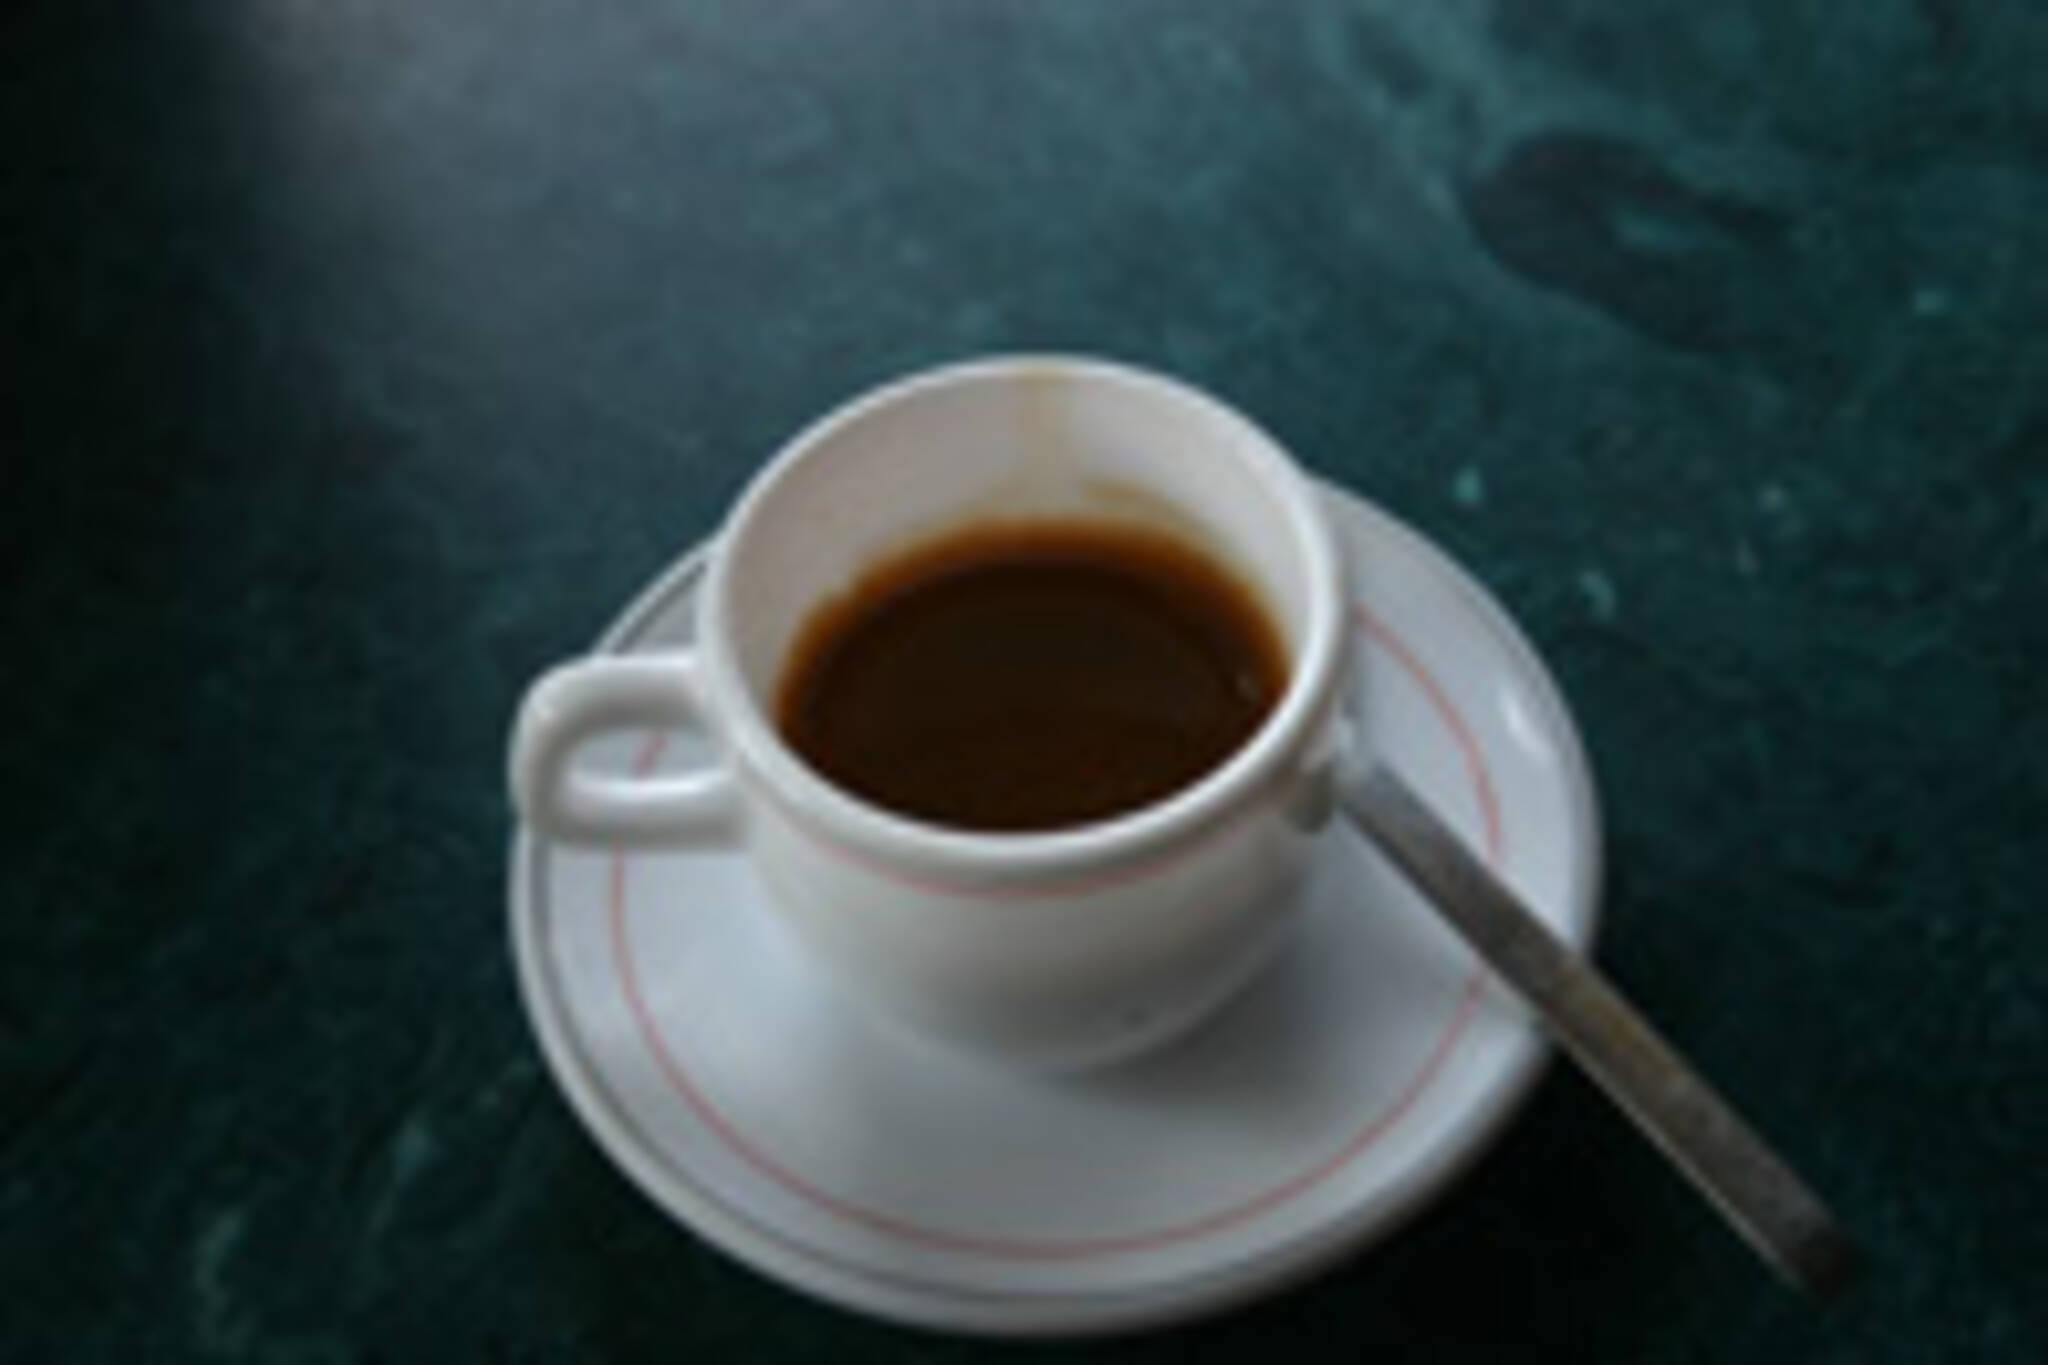 If you think this espresso looks good, you should see it in full-size